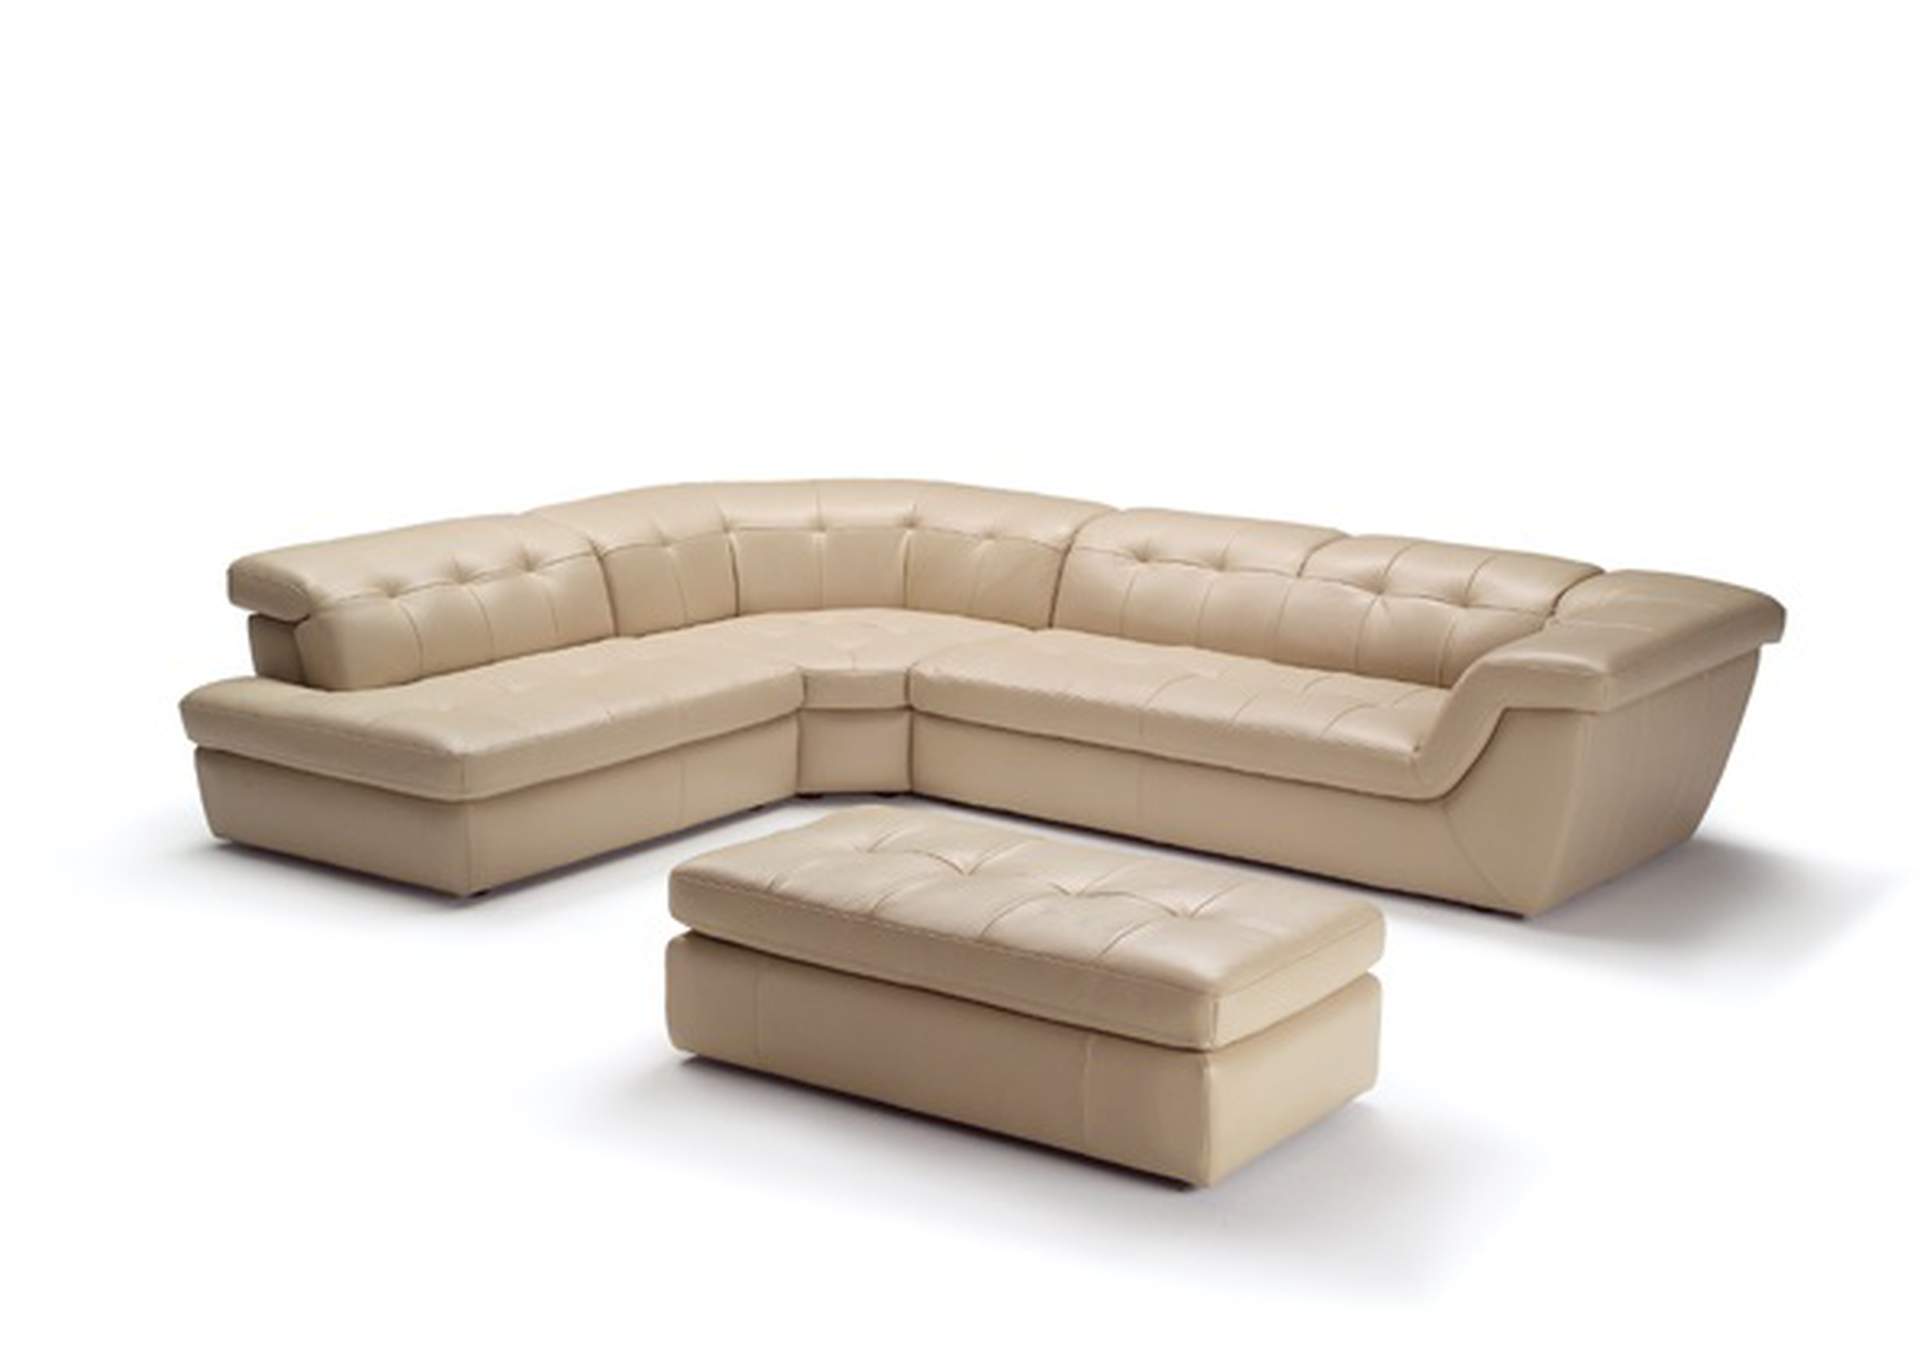 397 Italian Leather Sectional Beige Color In Left Hand Facing,J&M Furniture